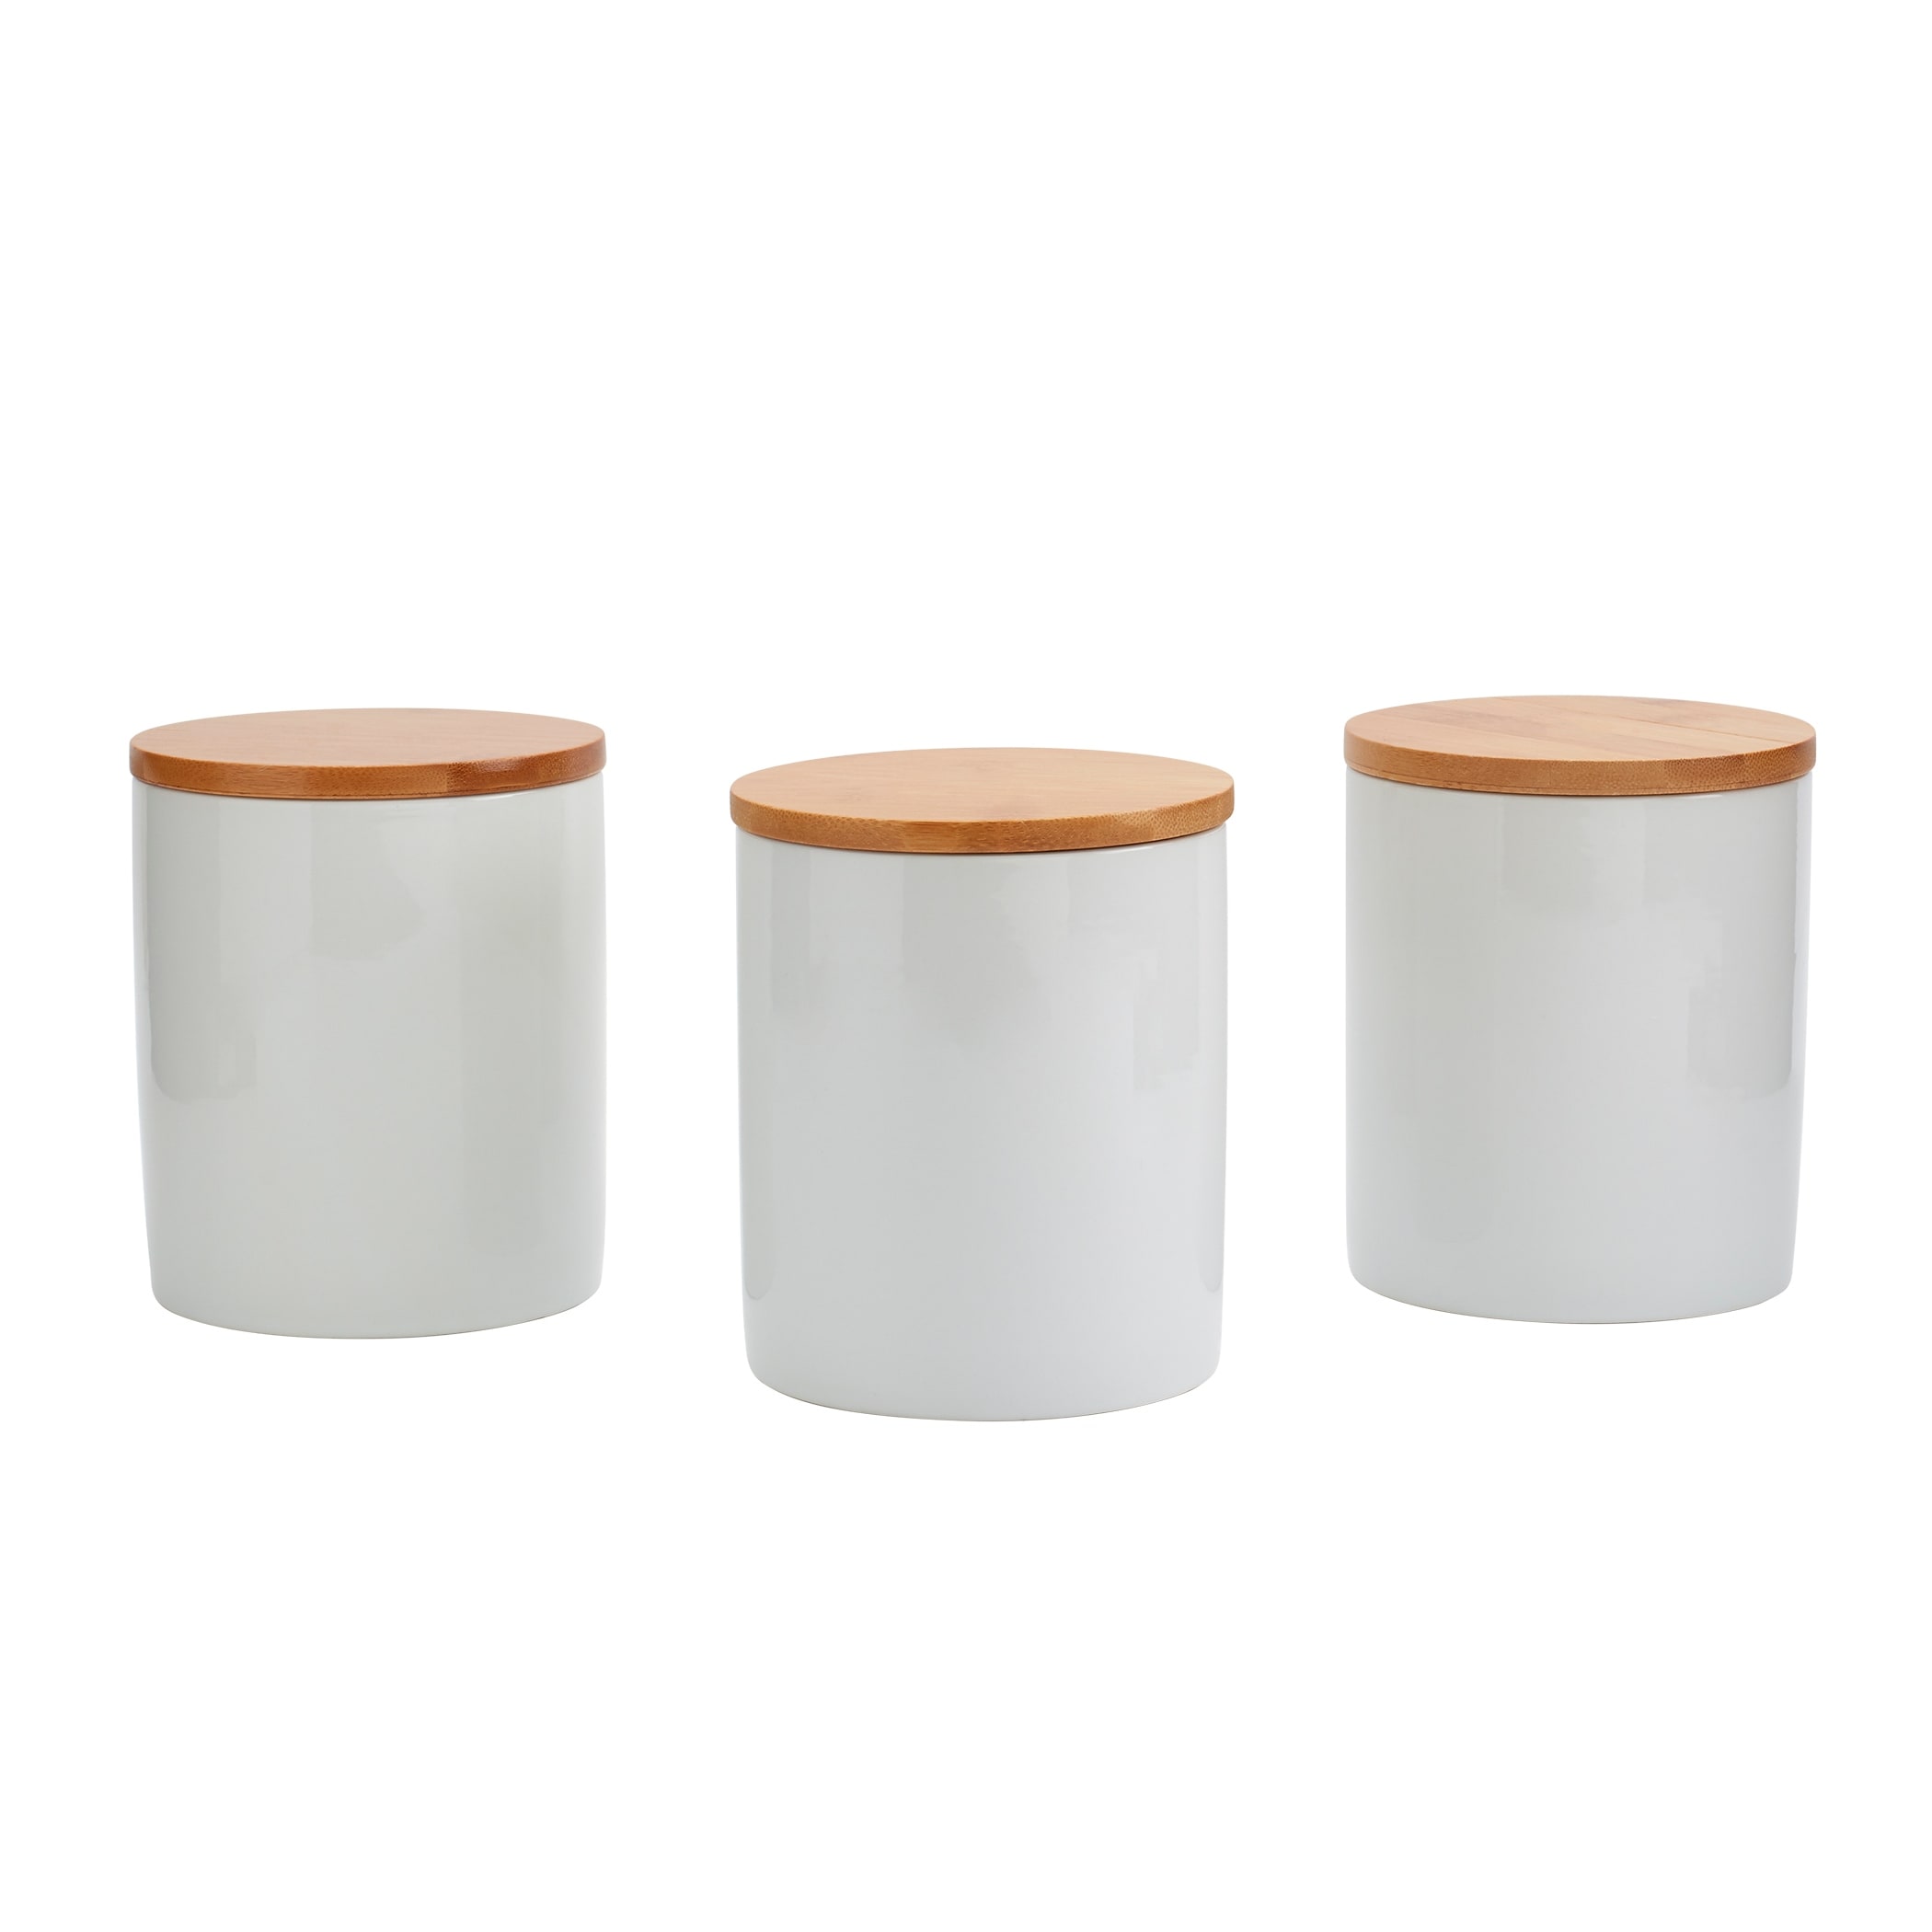 https://ak1.ostkcdn.com/images/products/is/images/direct/f2a8dc01bc0d78204947c11ec8592aff50d4f791/Set-of-3-Bamboo-%26-Ceramic-Canister-Set.jpg